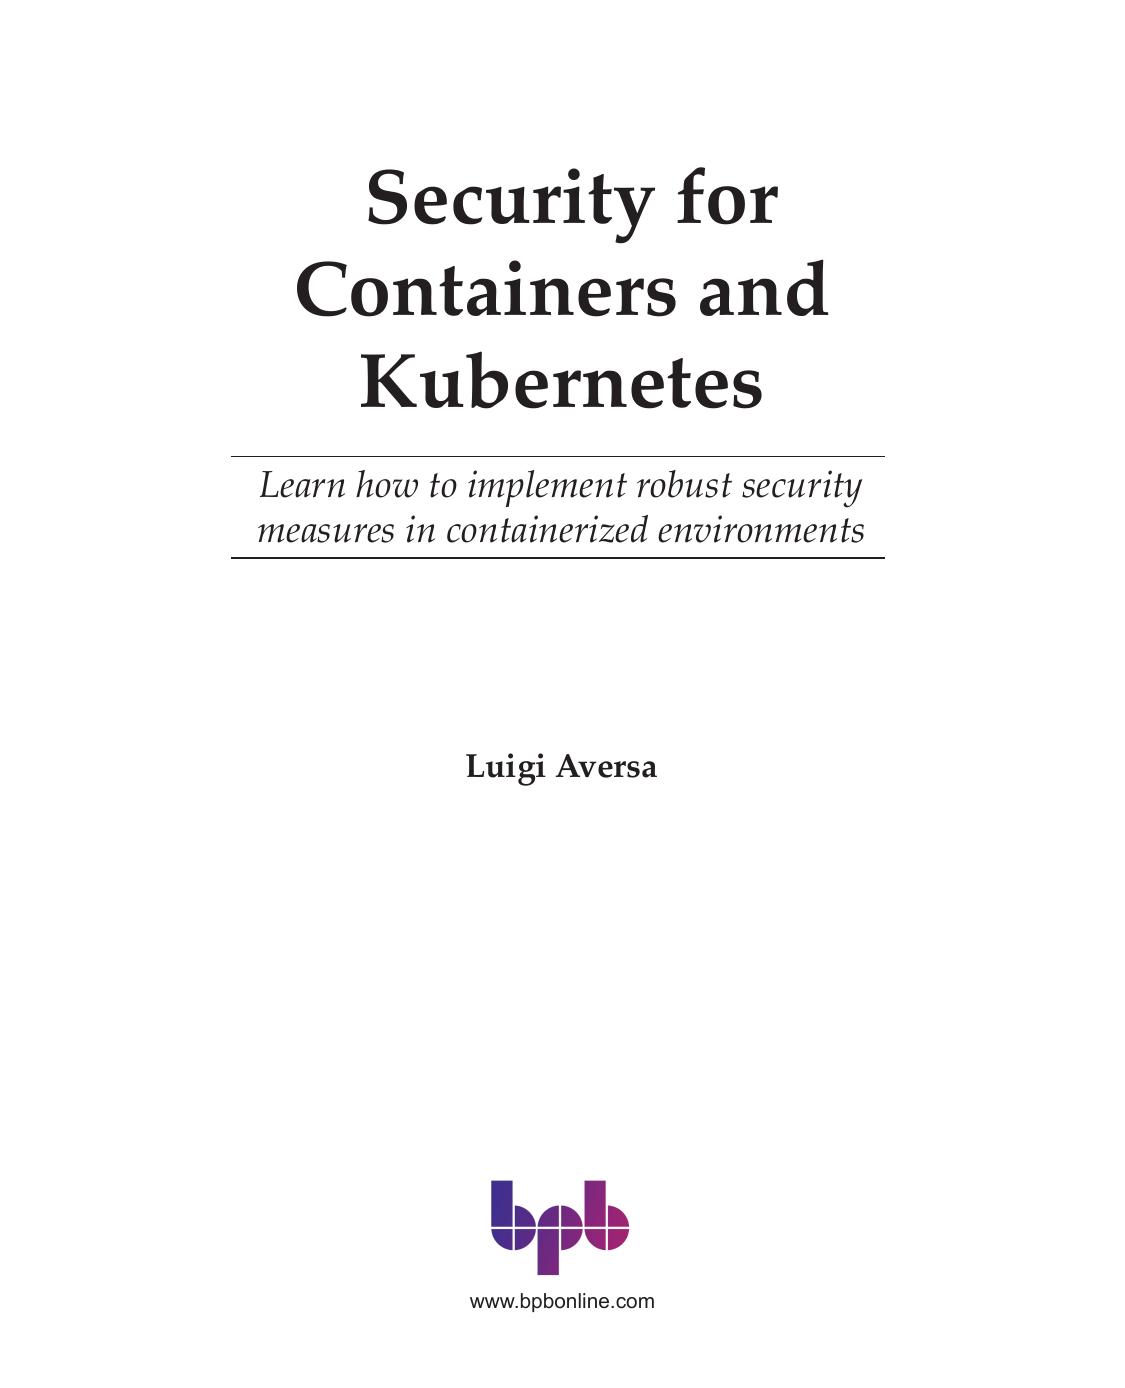 Security for Containers and Kubernetes: Learn how to implement robust security measures in containerized environments (English Edition) by Luigi Aversa